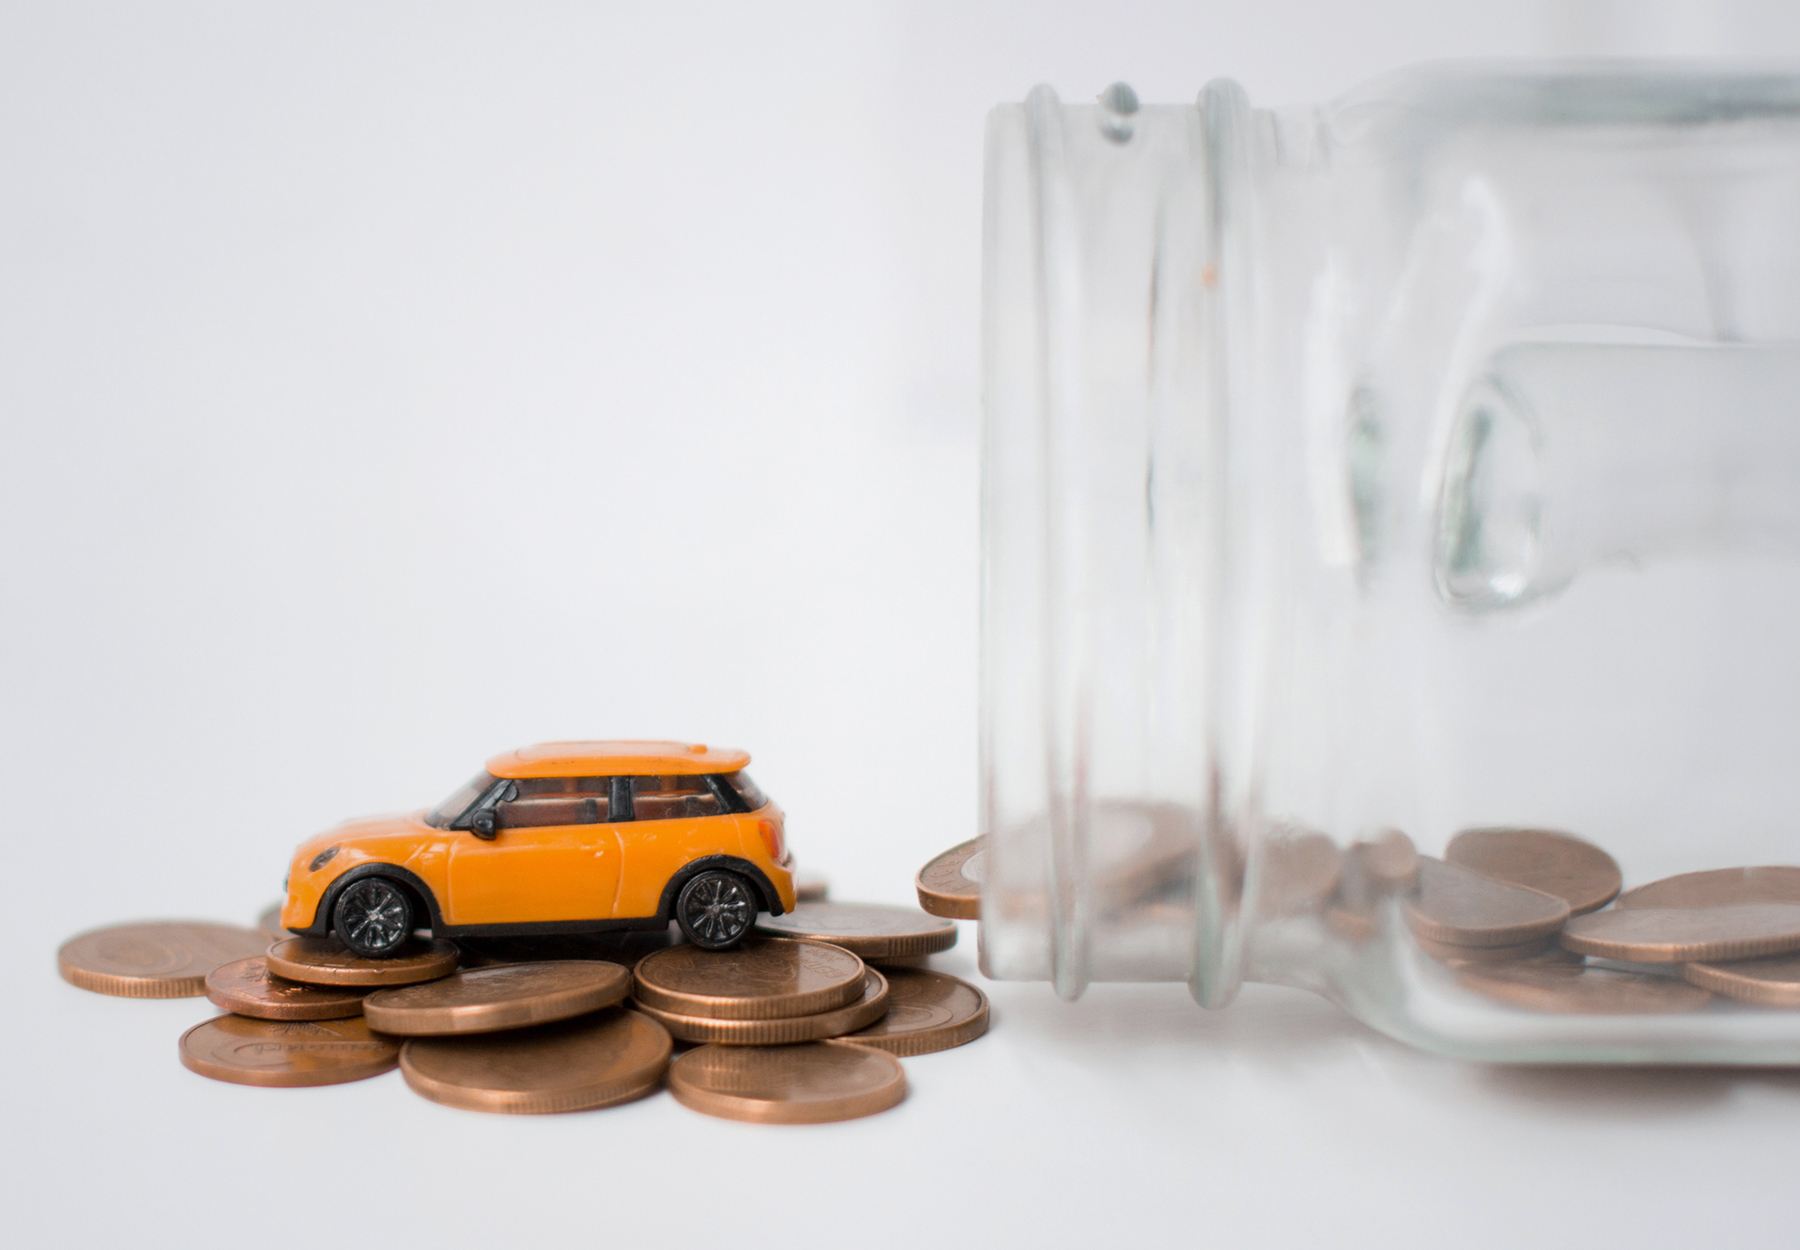 An orange model car rests on coins spilling from a jar. Travel allowance concept. iStock image.